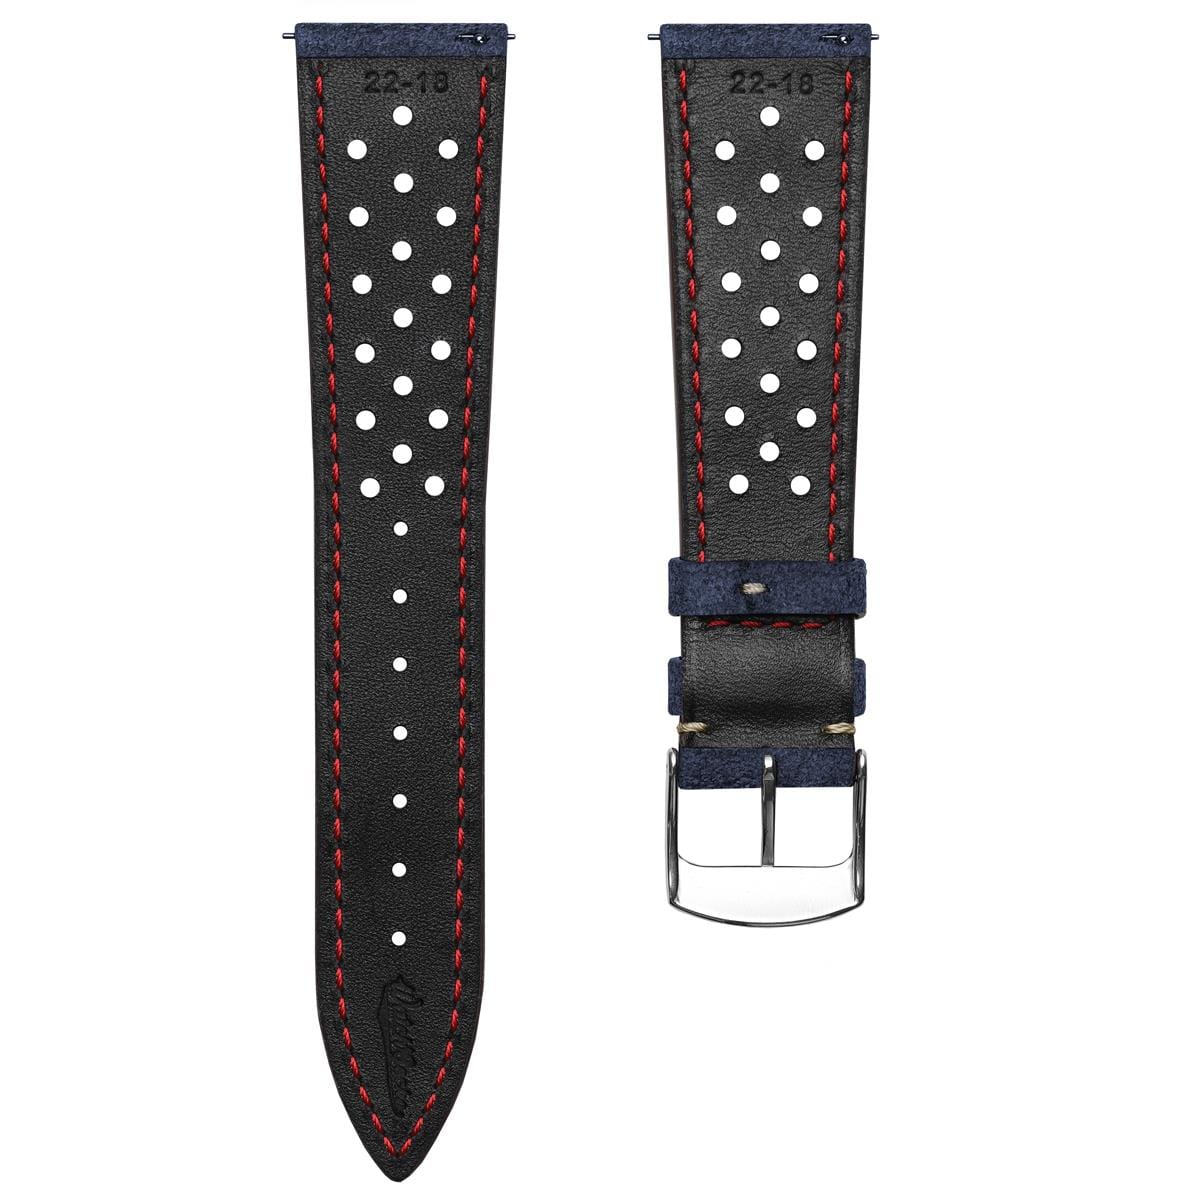 Beaufort Racing Conceria Opera Suede Perforated Watch Strap - Midnight Blue